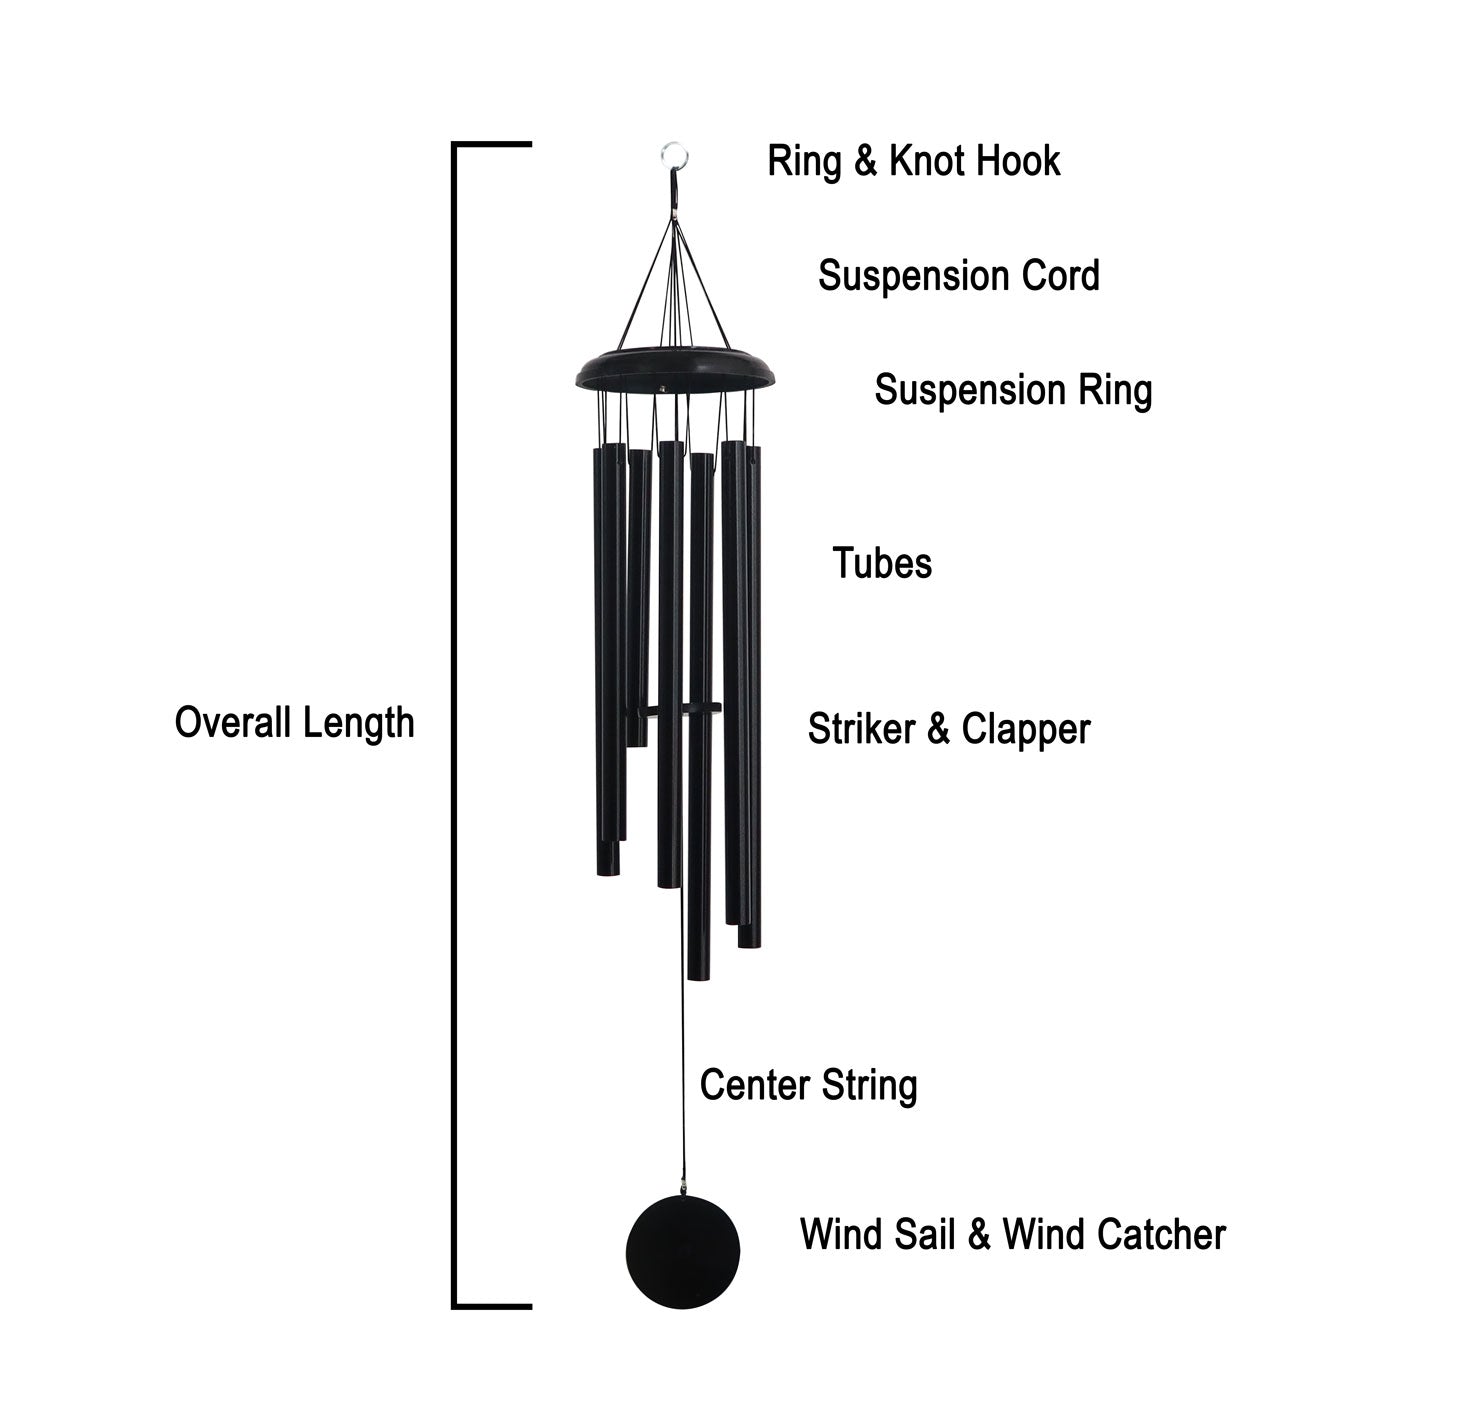 Personalized Memorial Wind Chime WCP37